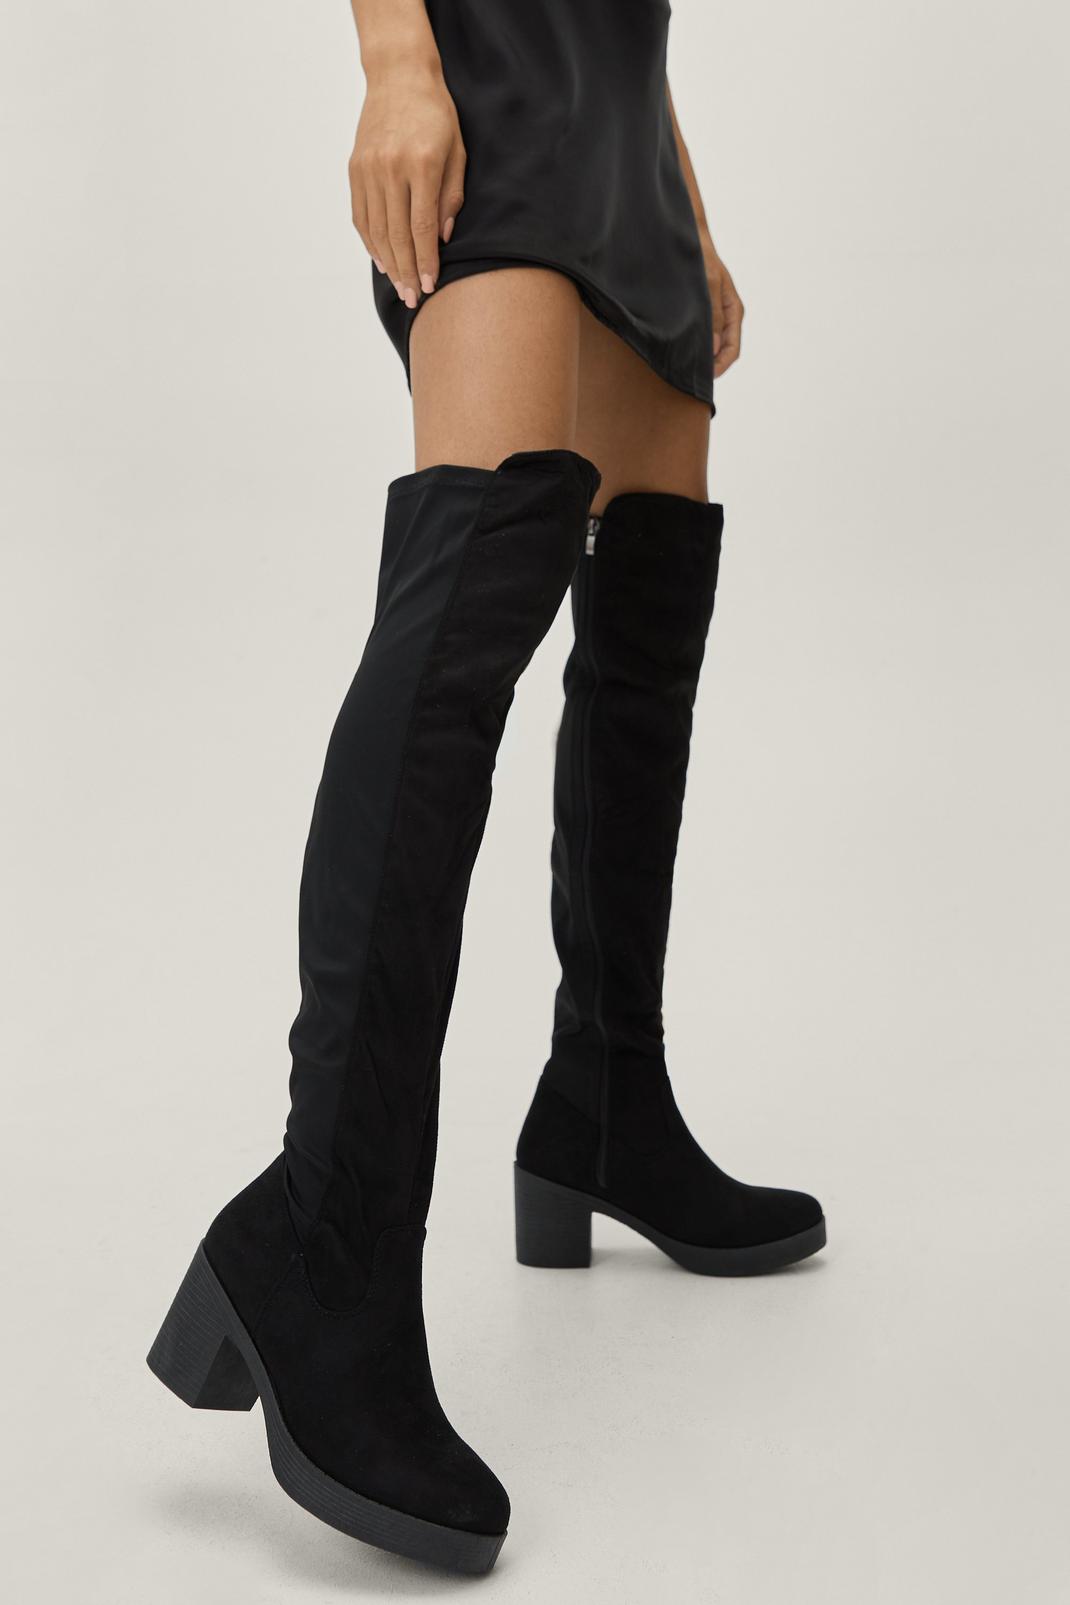 Black Immi Suede Knee High Heeled Boots image number 1